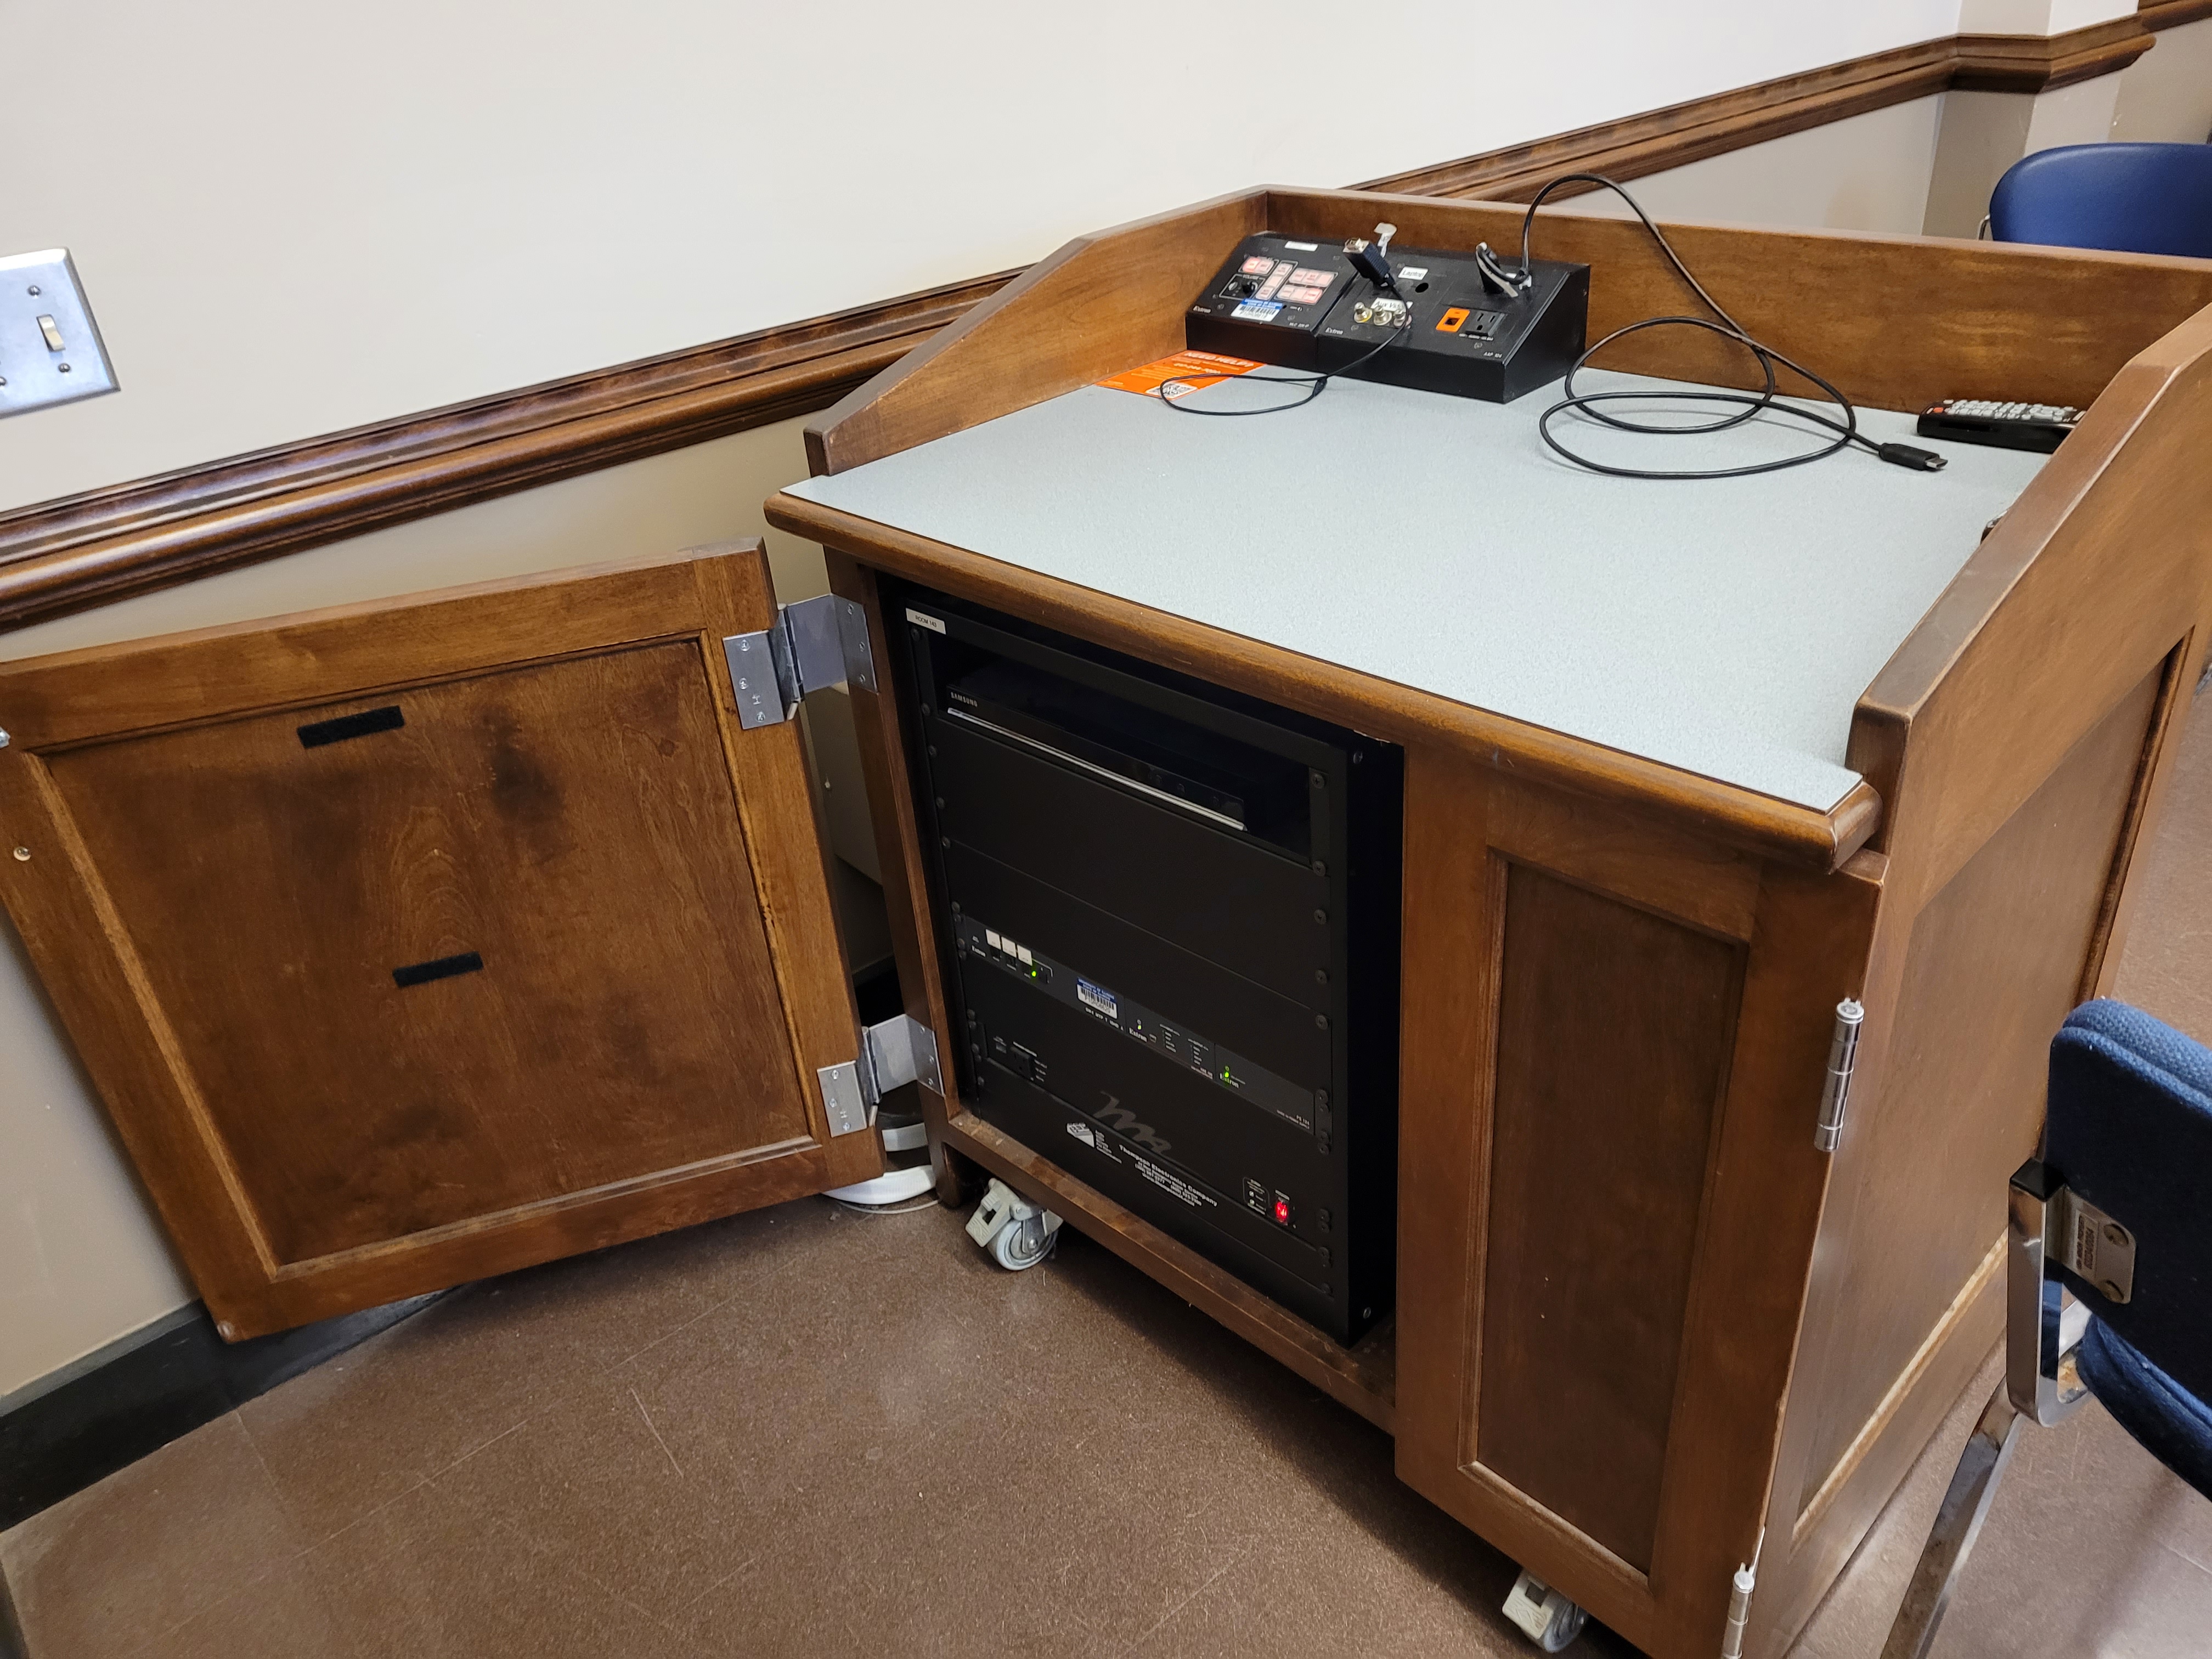 A view of the open cabinet with VGA and HDMI inputs, push button controller, and audio visual rack.